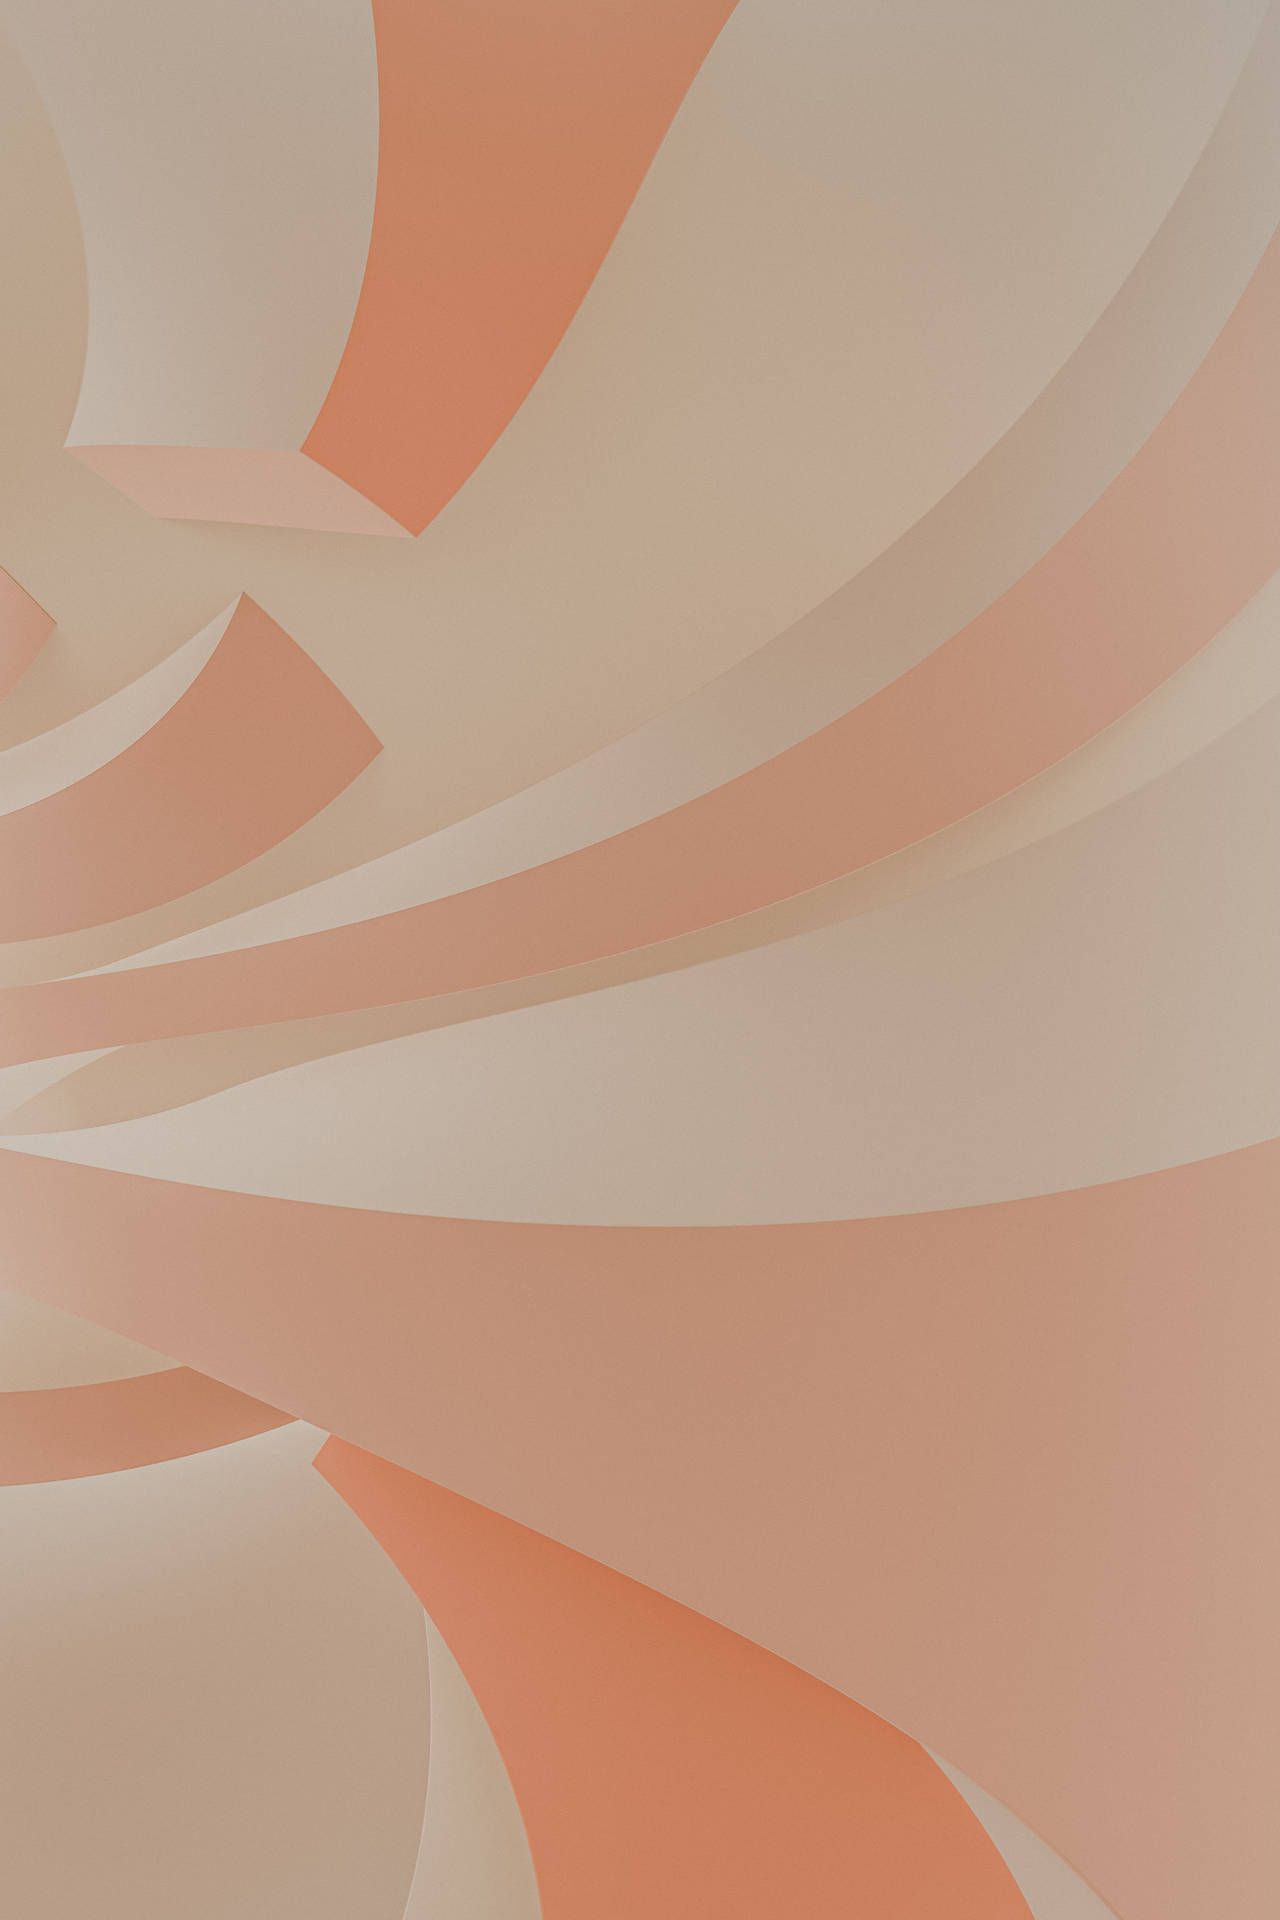 Download Shades Of Pastel Orange Aesthetic Color Wallpaper